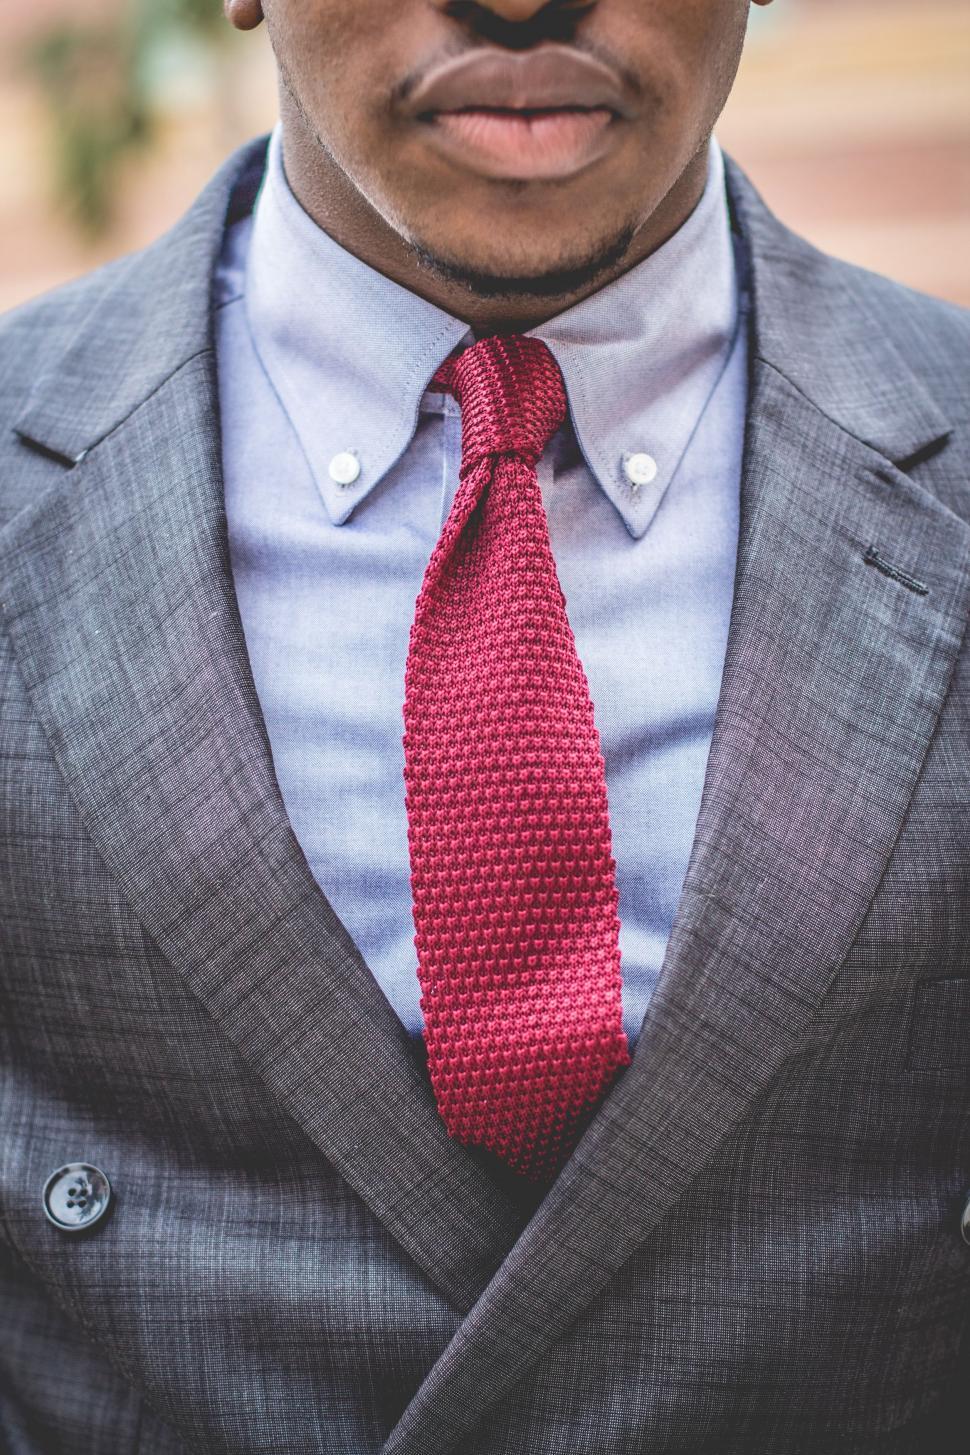 Free Image of Man in Suit With Red Tie 